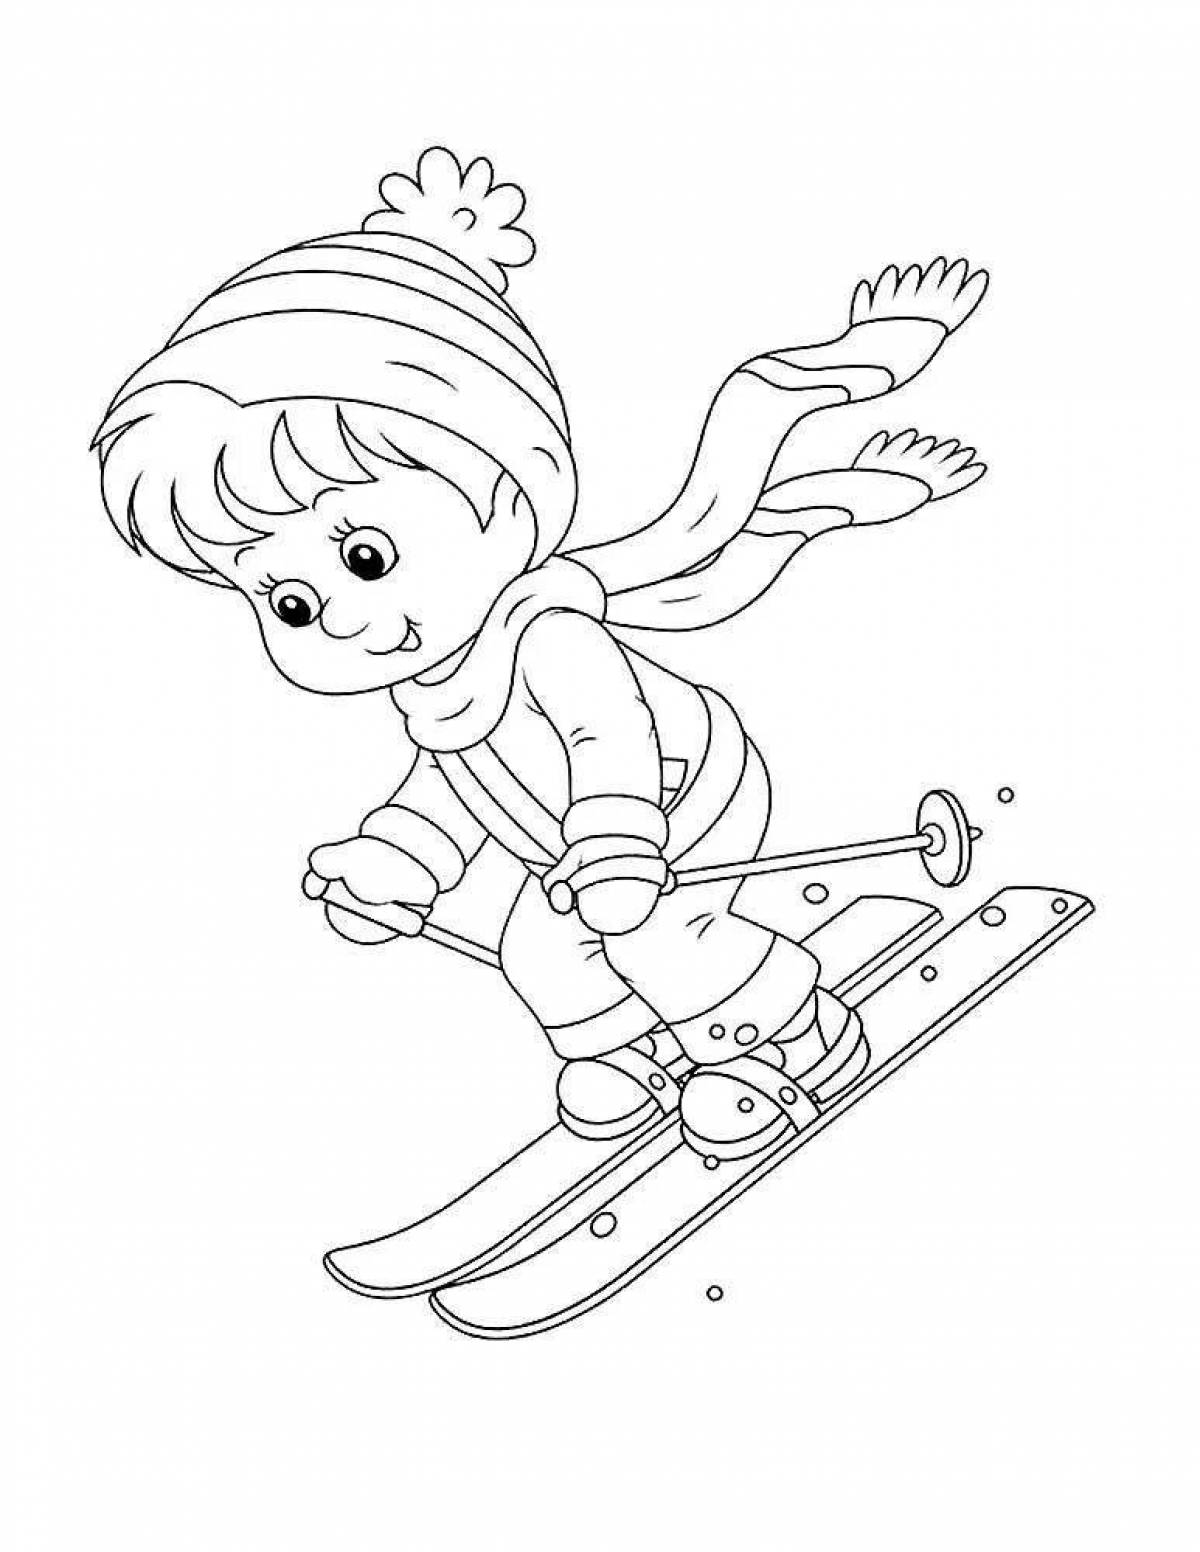 Fun coloring book for kids on skis